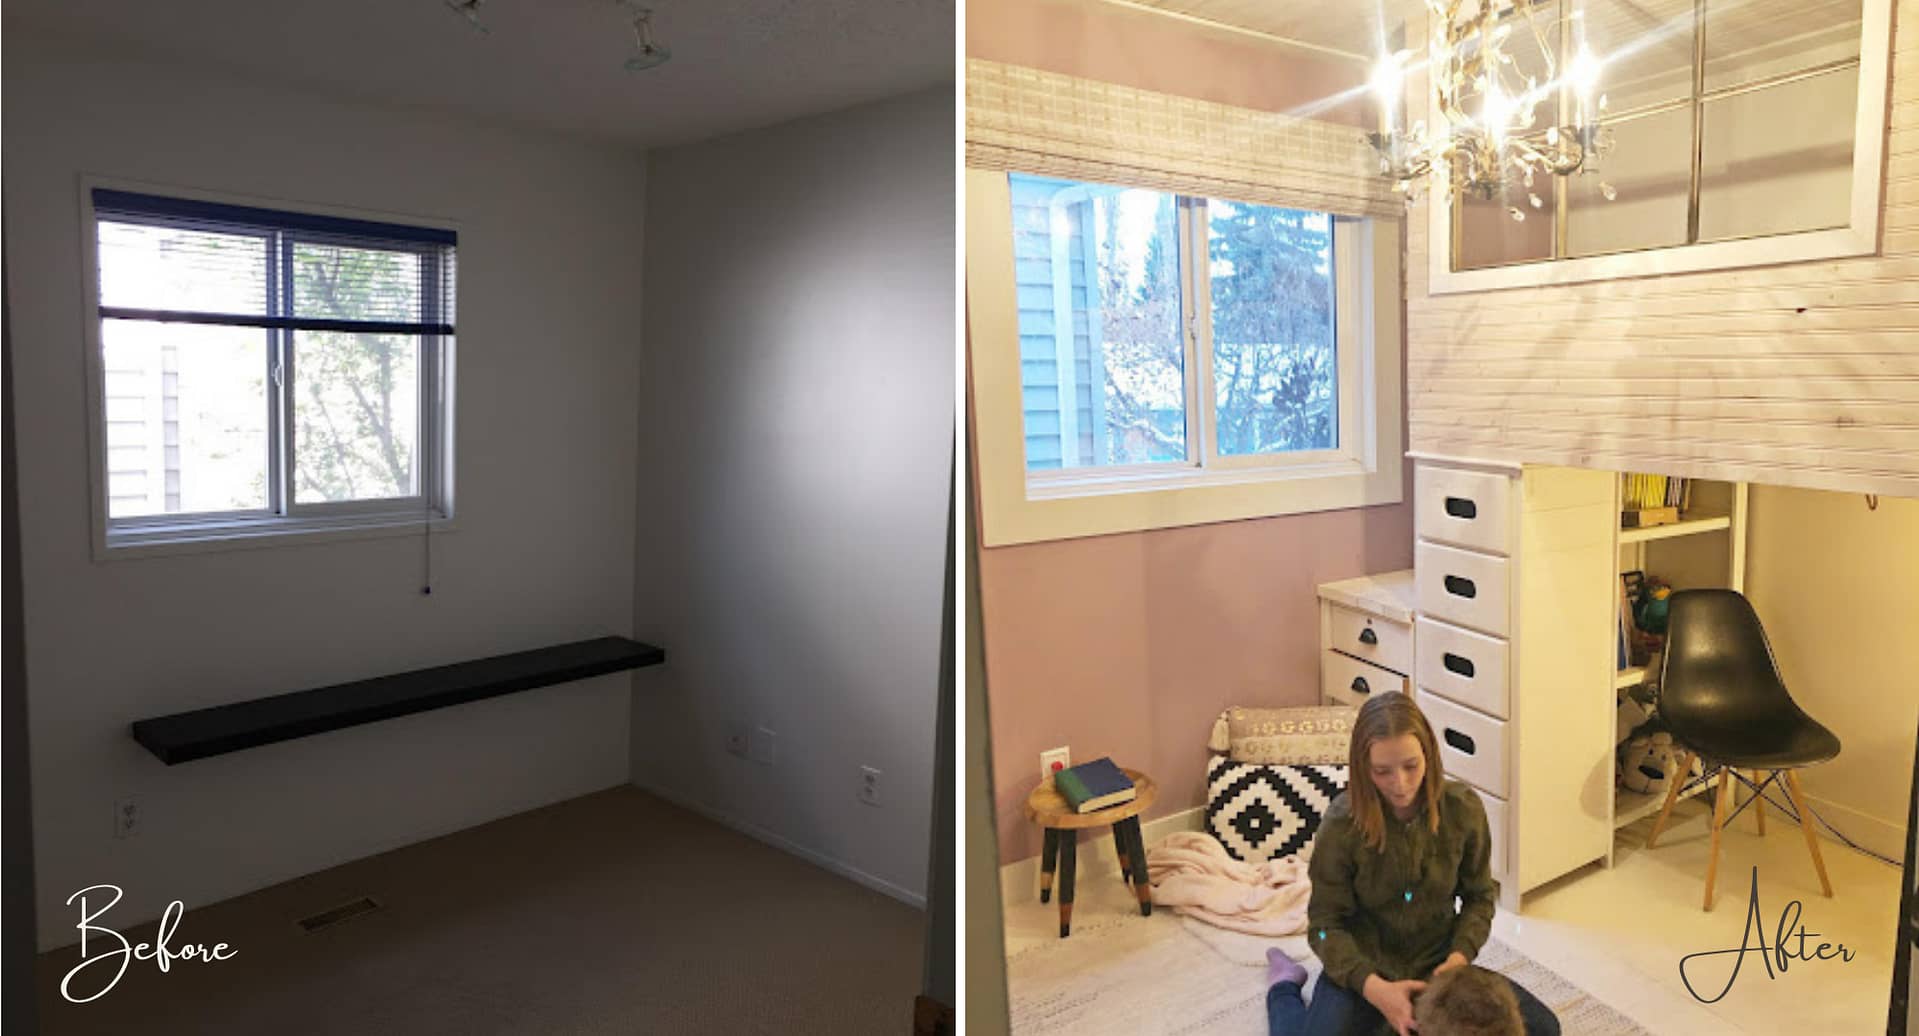 A girl's bedroom makeover before and after